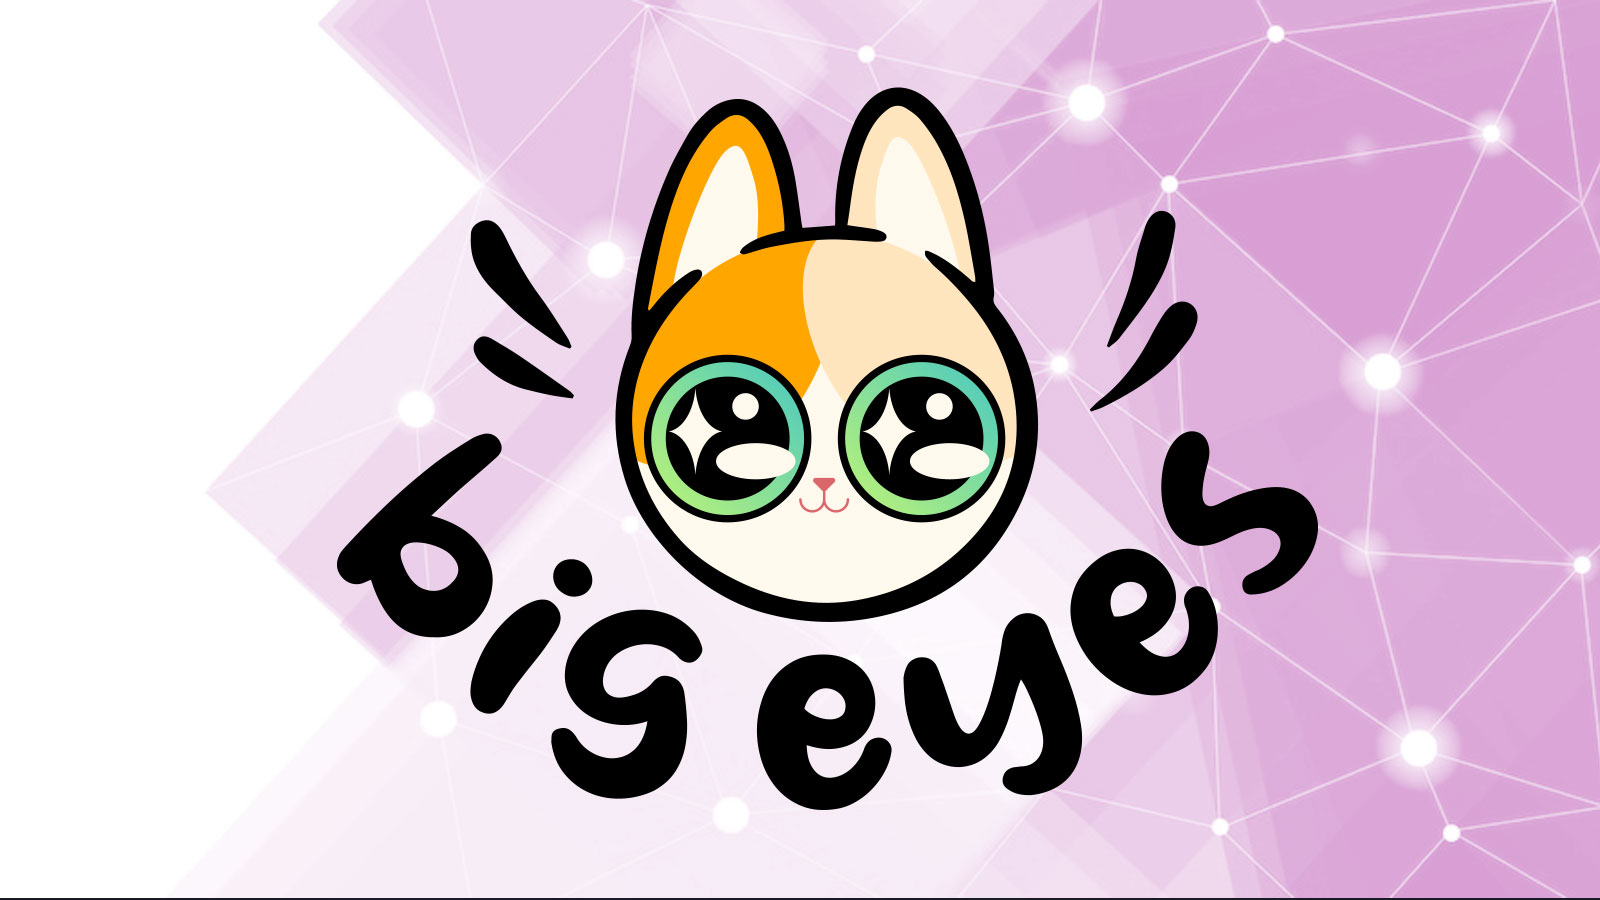 Big Eyes Coin (BIG) Launches Giveaway to Attract Potential Shiba Inu (SHIB) Investors